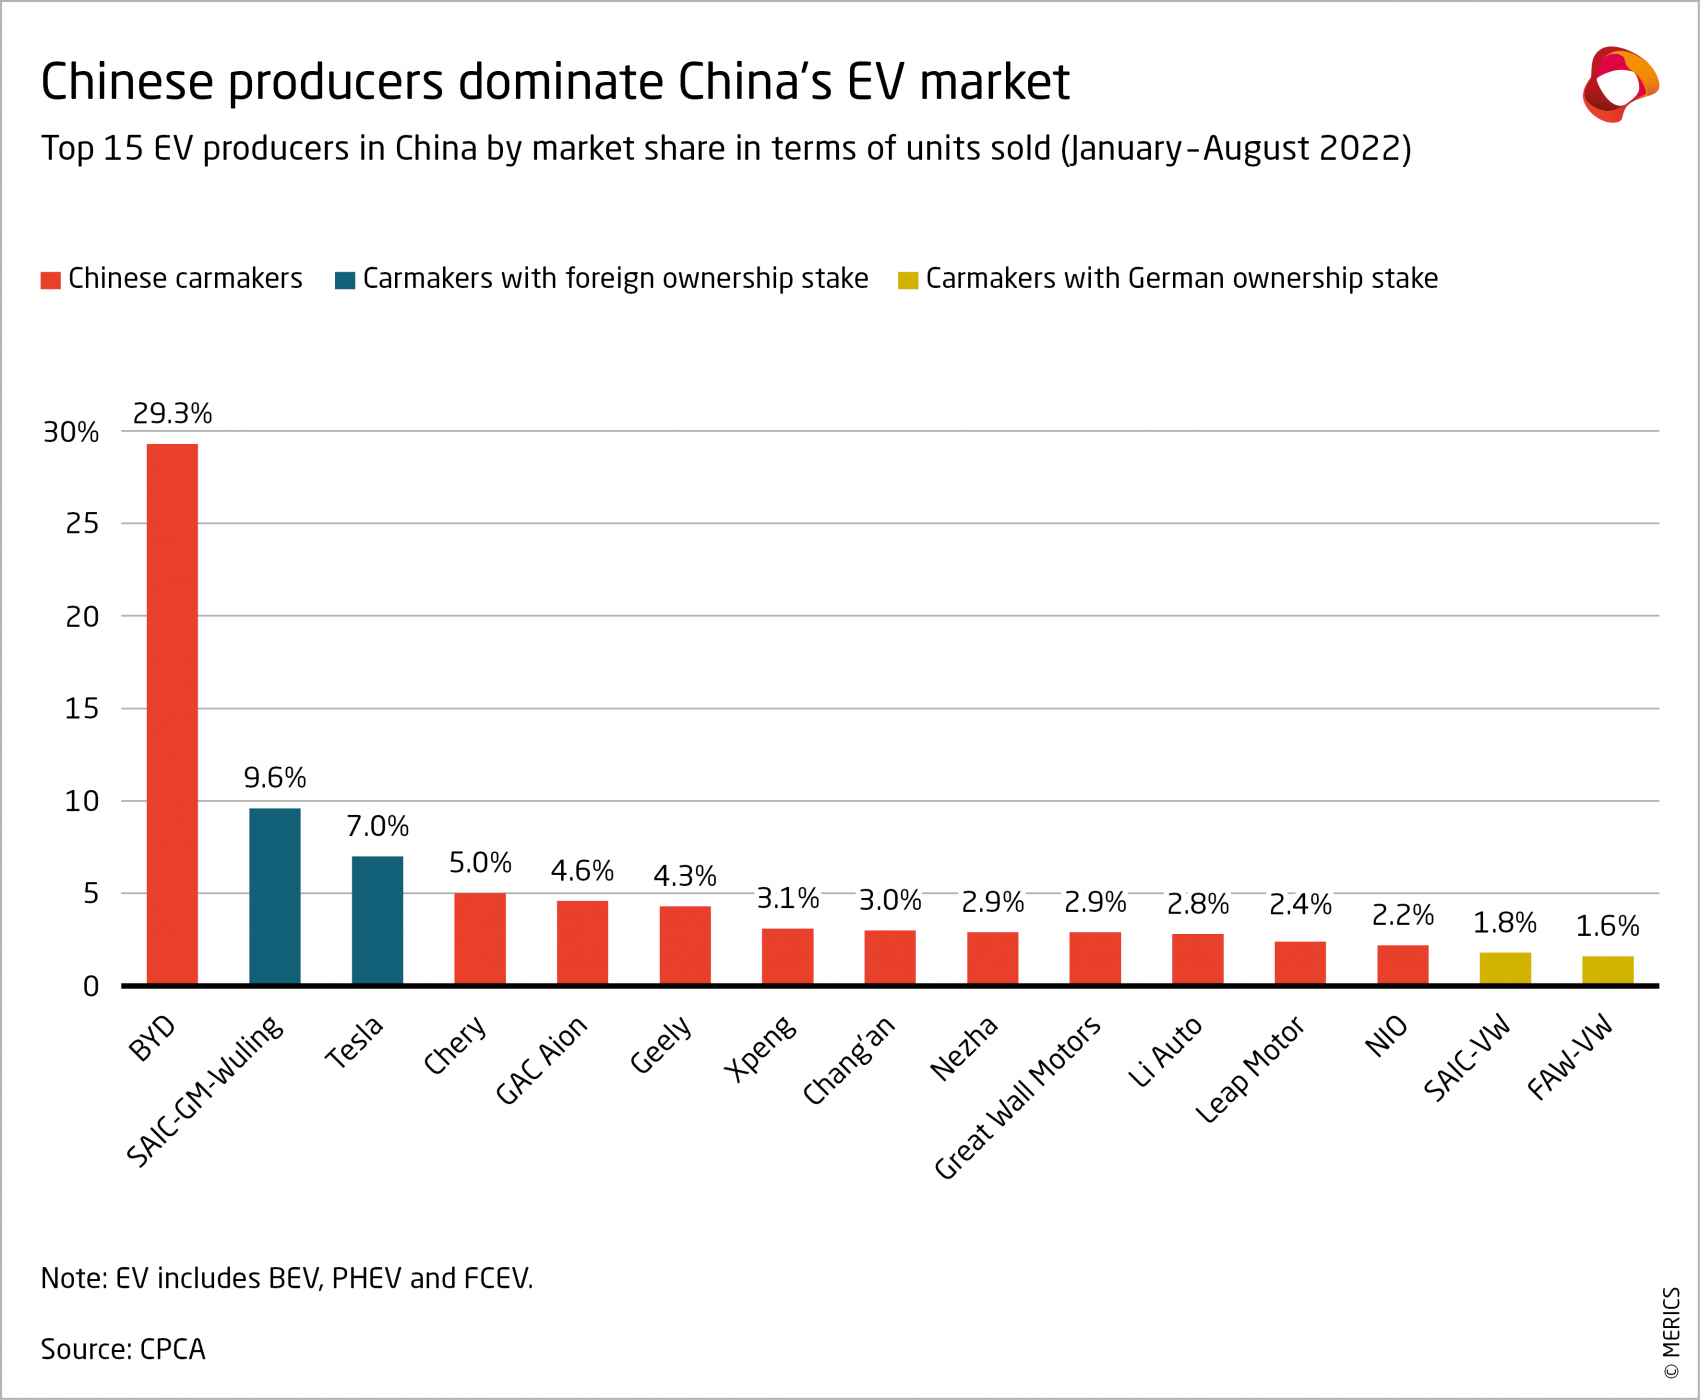 MERICS-Automotive-RD-in-China-Chinese-producers-dominate-Chinas-EV-market-Exhibit-5.png